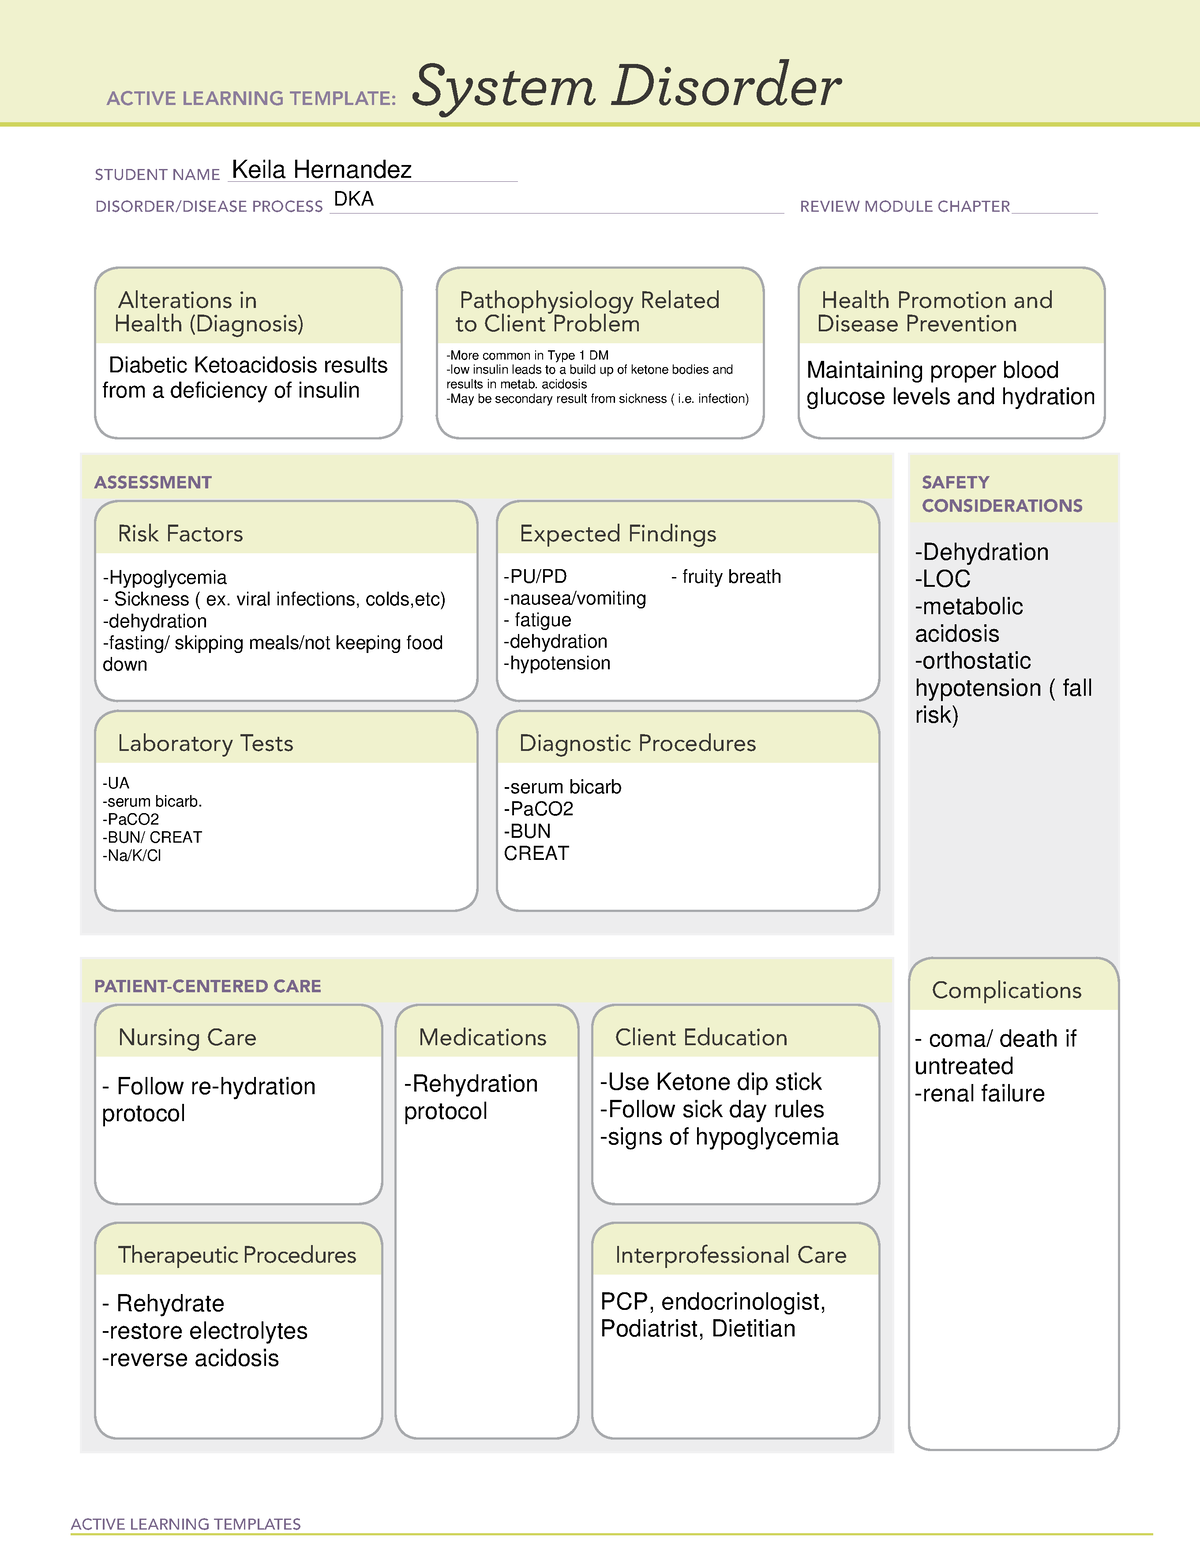 ATI Active Learning Template System DKA ACTIVE LEARNING TEMPLATES